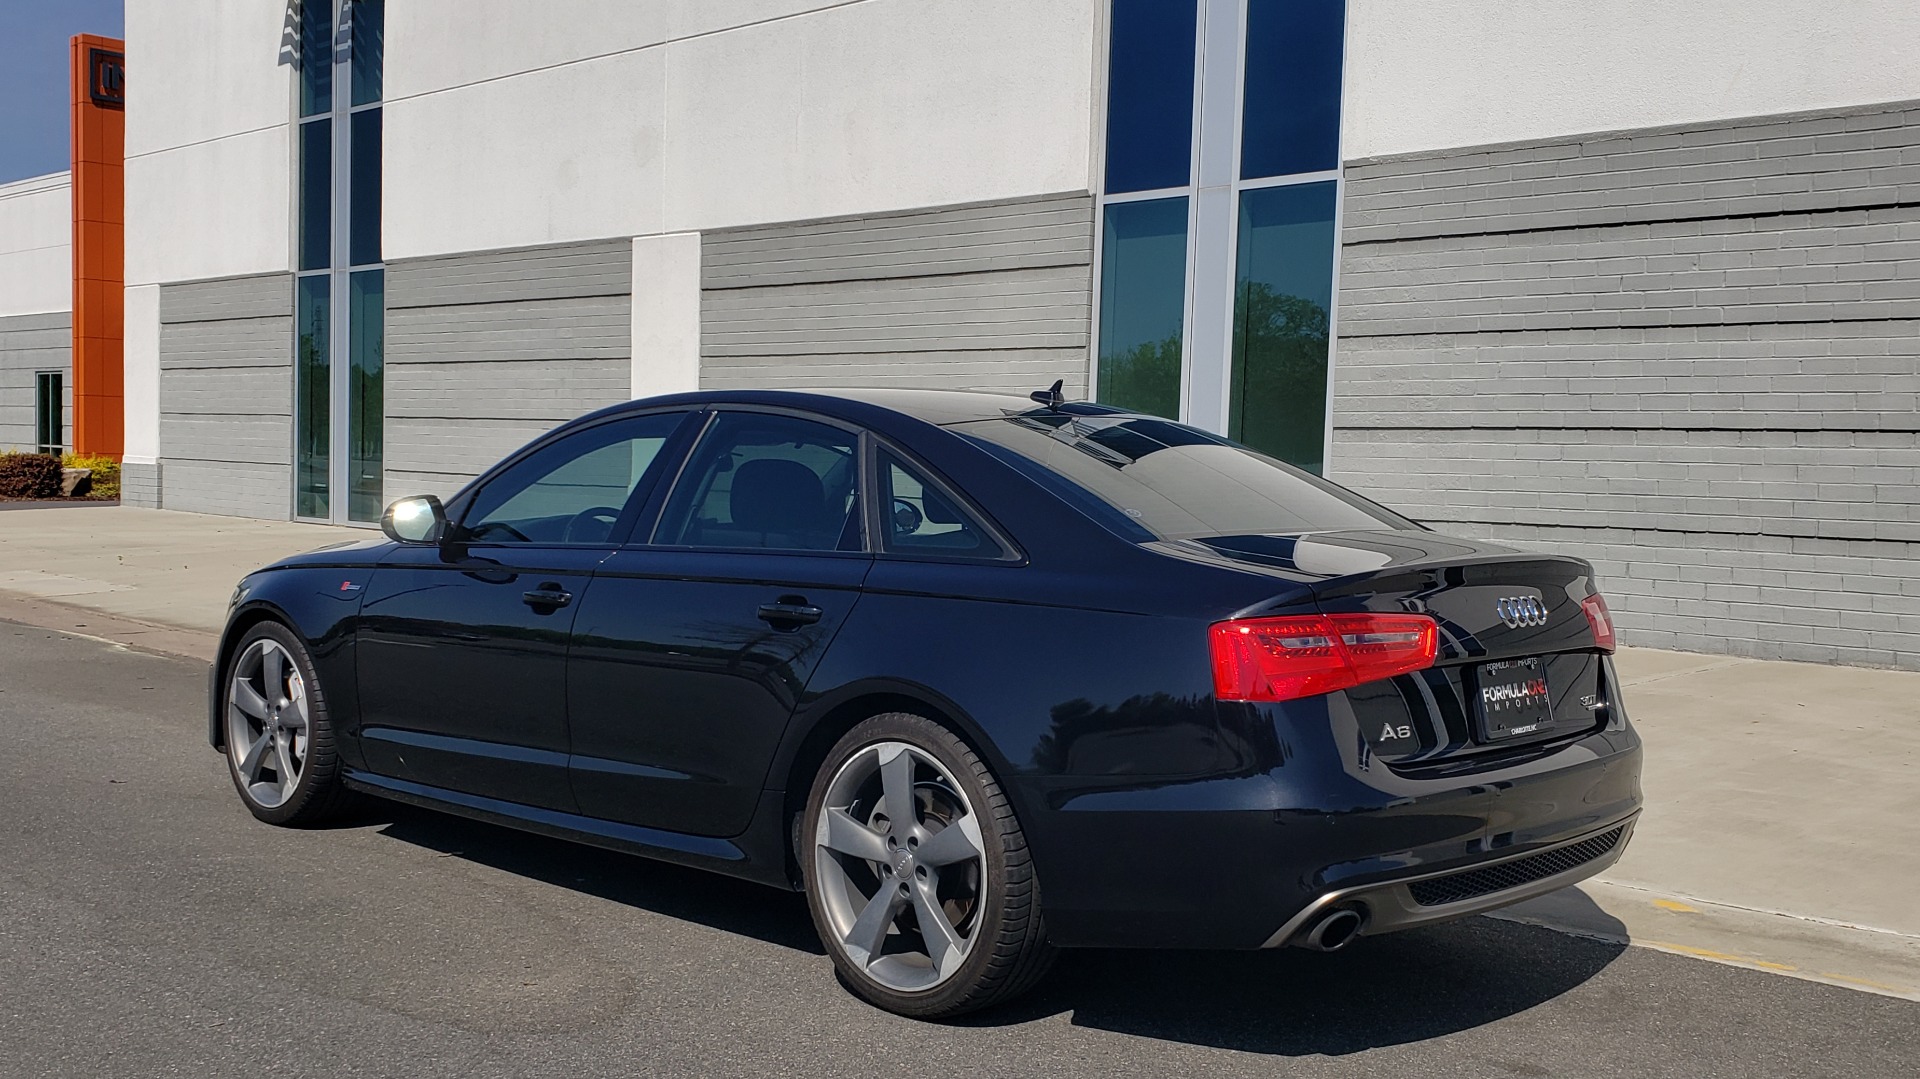 Used 2015 Audi A6 3.0T PRESTIGE / BLACK OPTIC / CLD WTHR / BOSE / HUD / SUNROOF for sale Sold at Formula Imports in Charlotte NC 28227 5